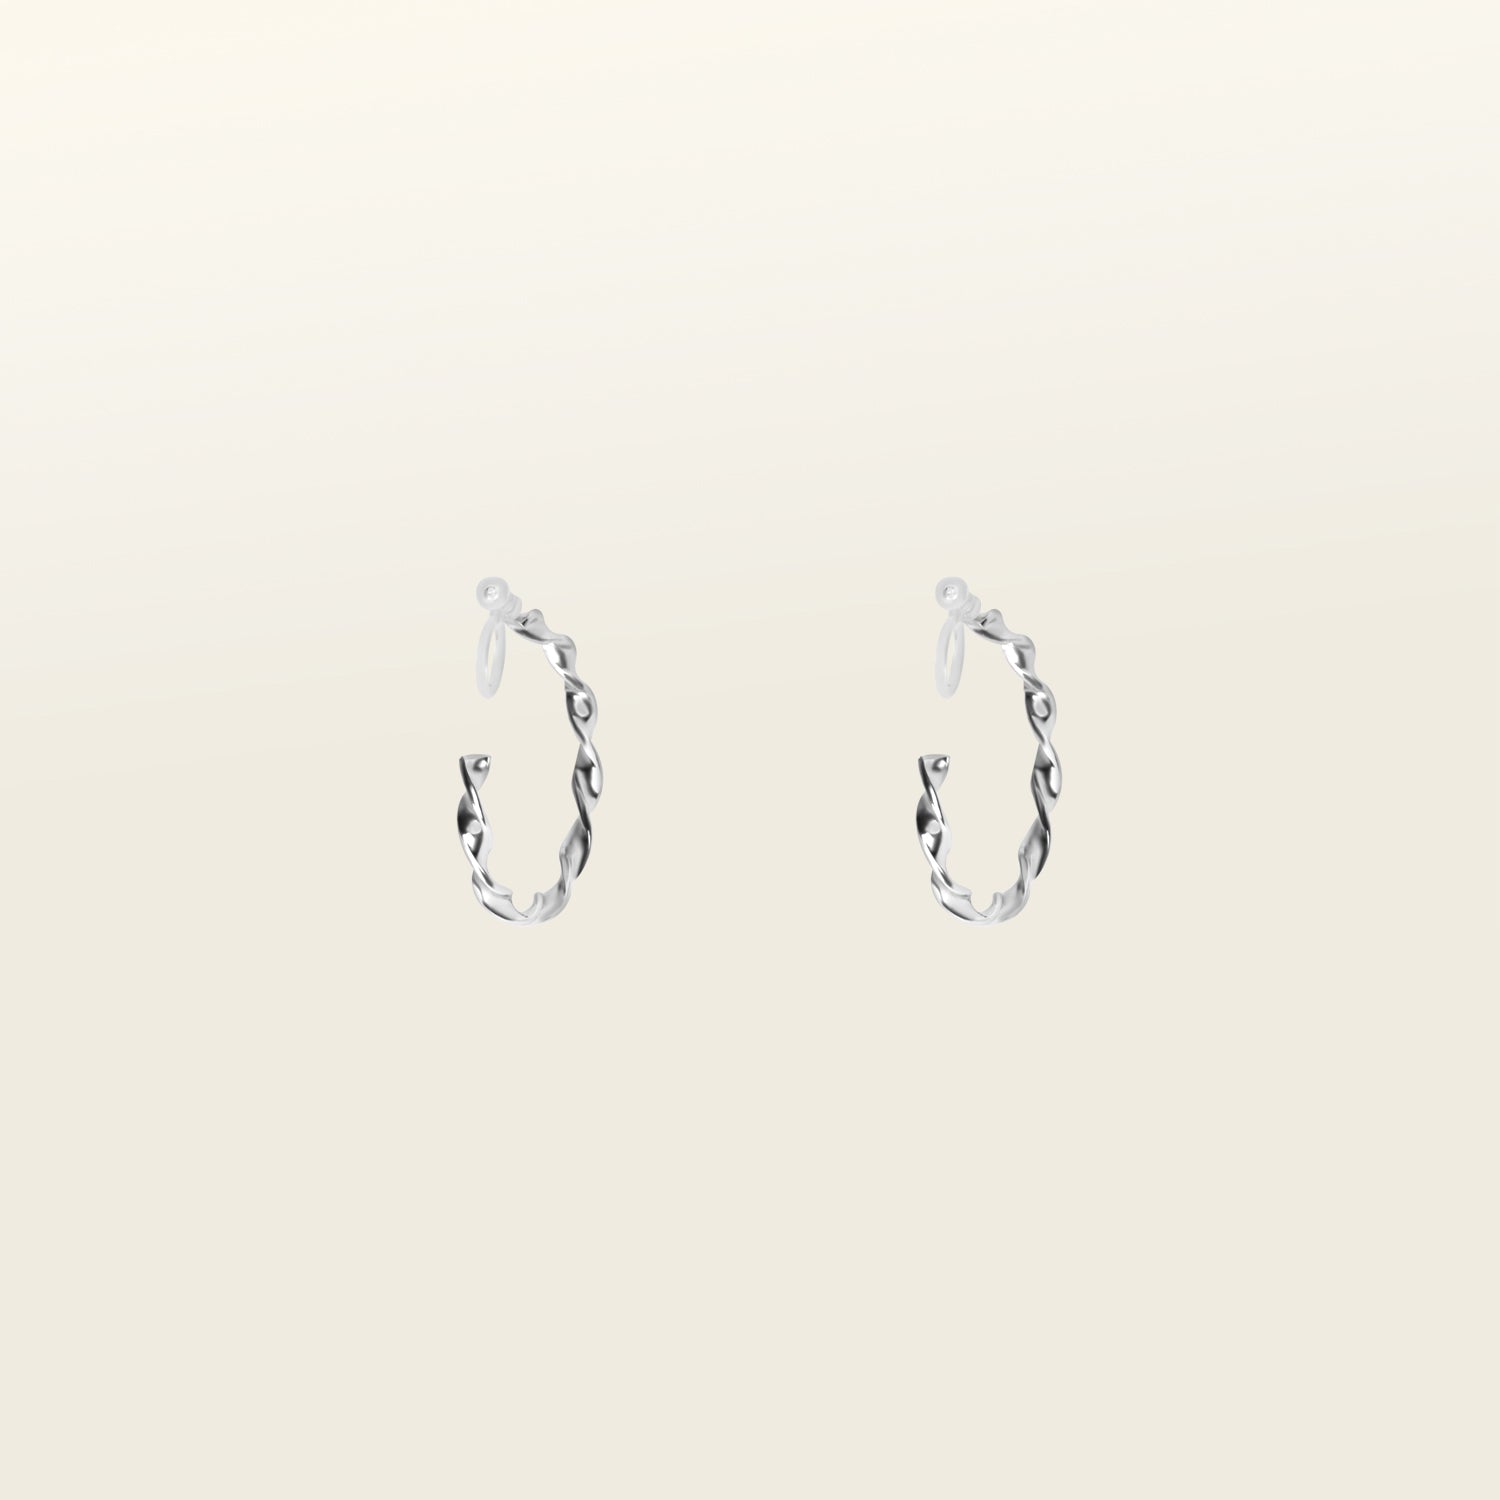 Image of the Silver Wave Hoop Clip-On Earrings are perfect for all ear types. Whether you have thick or large ears, or sensitive, small or thin ears, these earrings offer a medium-secure hold and can be comfortably worn for 8-12 hours. The earrings are made of silver-tone metal alloy and offer no ability to adjust - each purchase is for one pair. You can also find these earrings in a gold version.